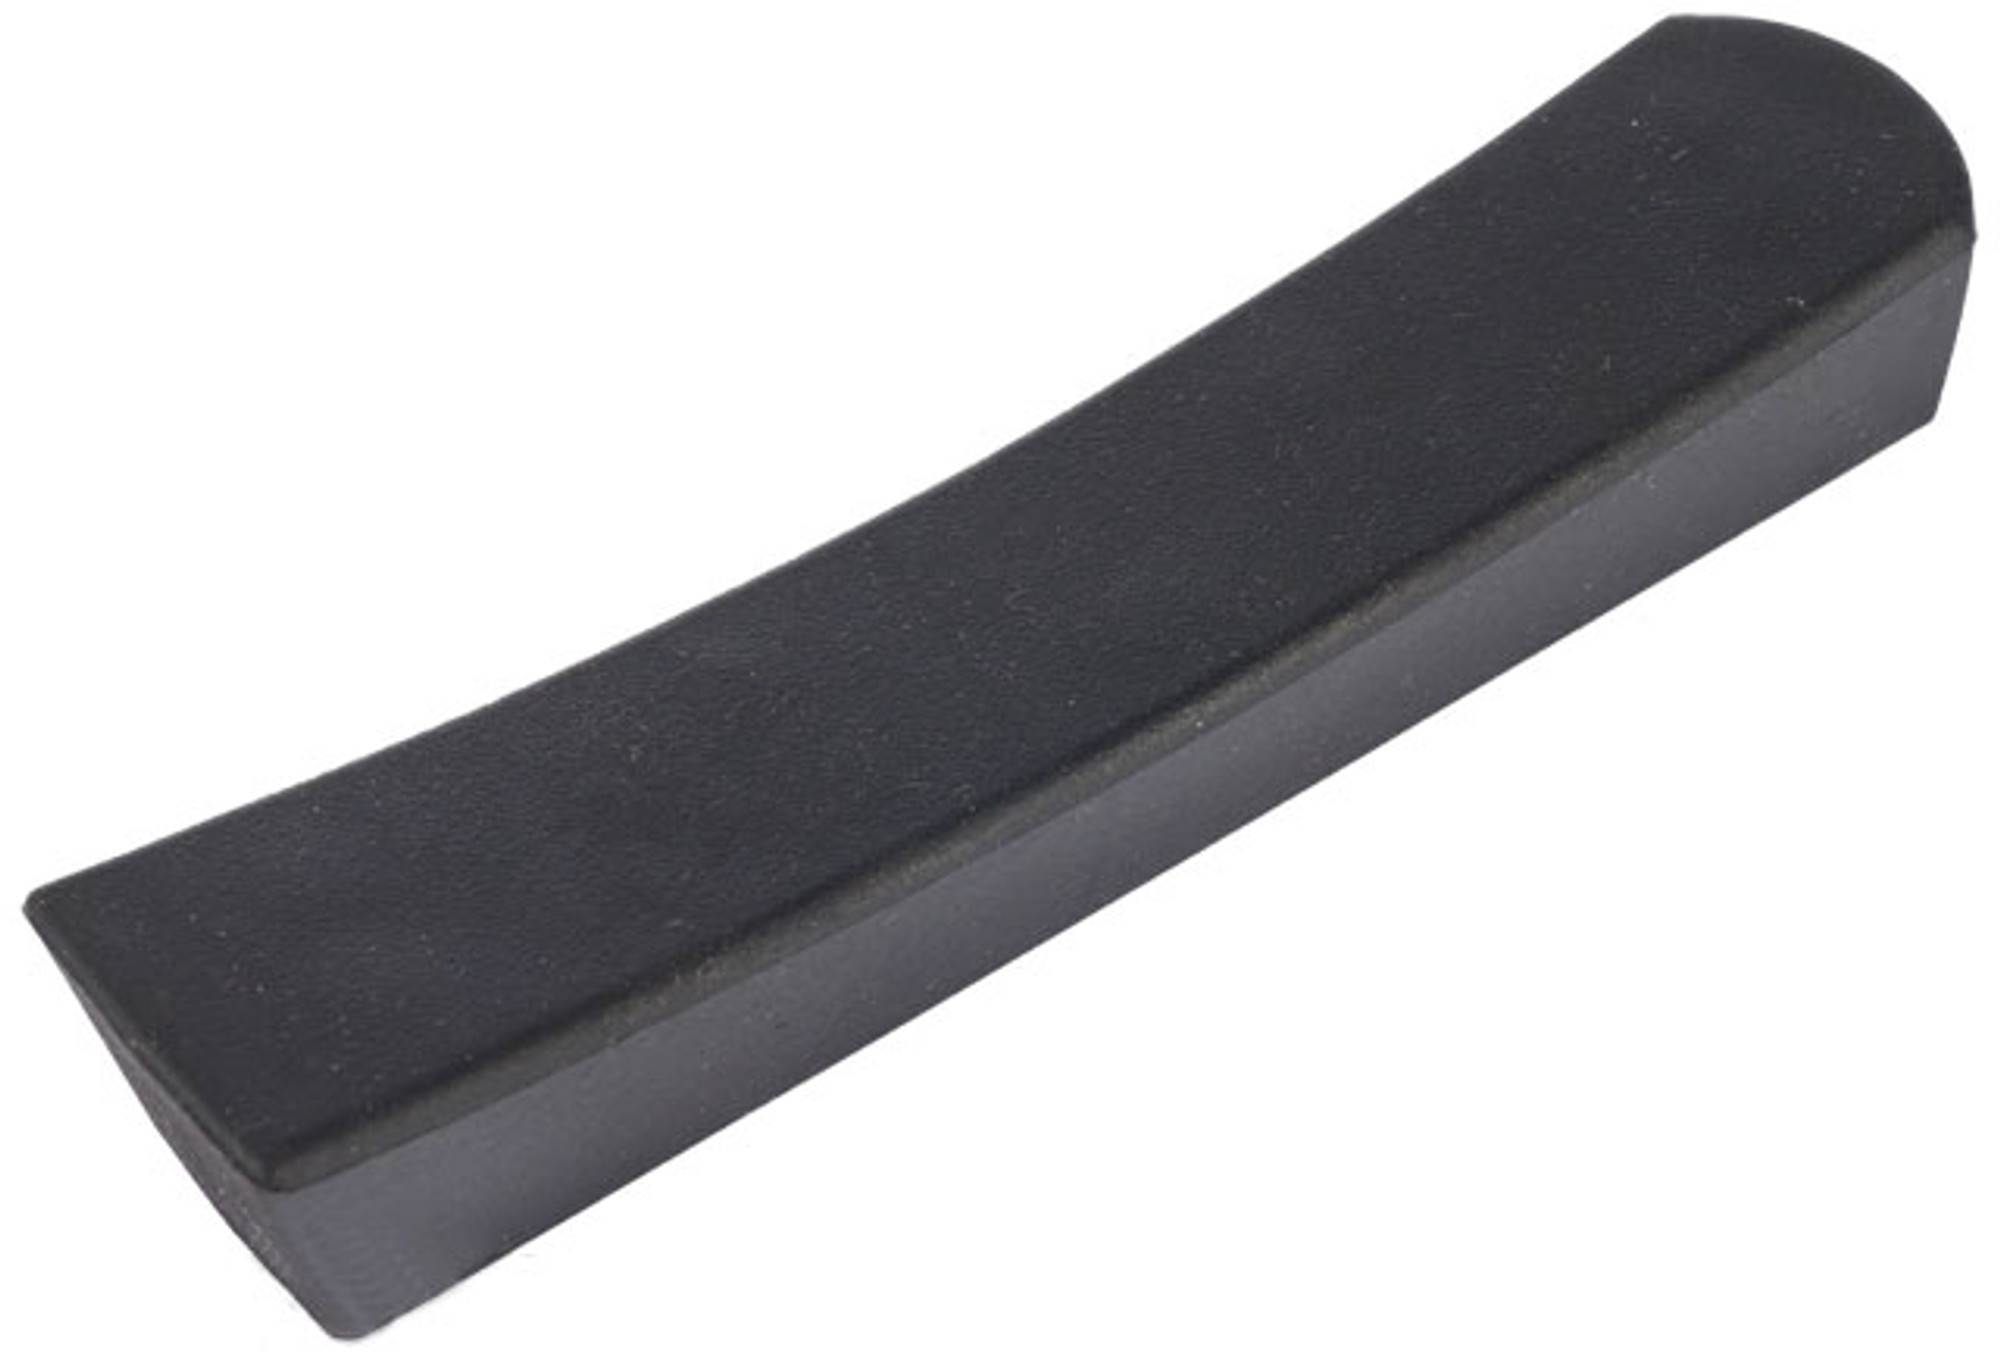 WE G39 Series Airsoft GBB Rifle Part #64 - Stock Rubber Pad